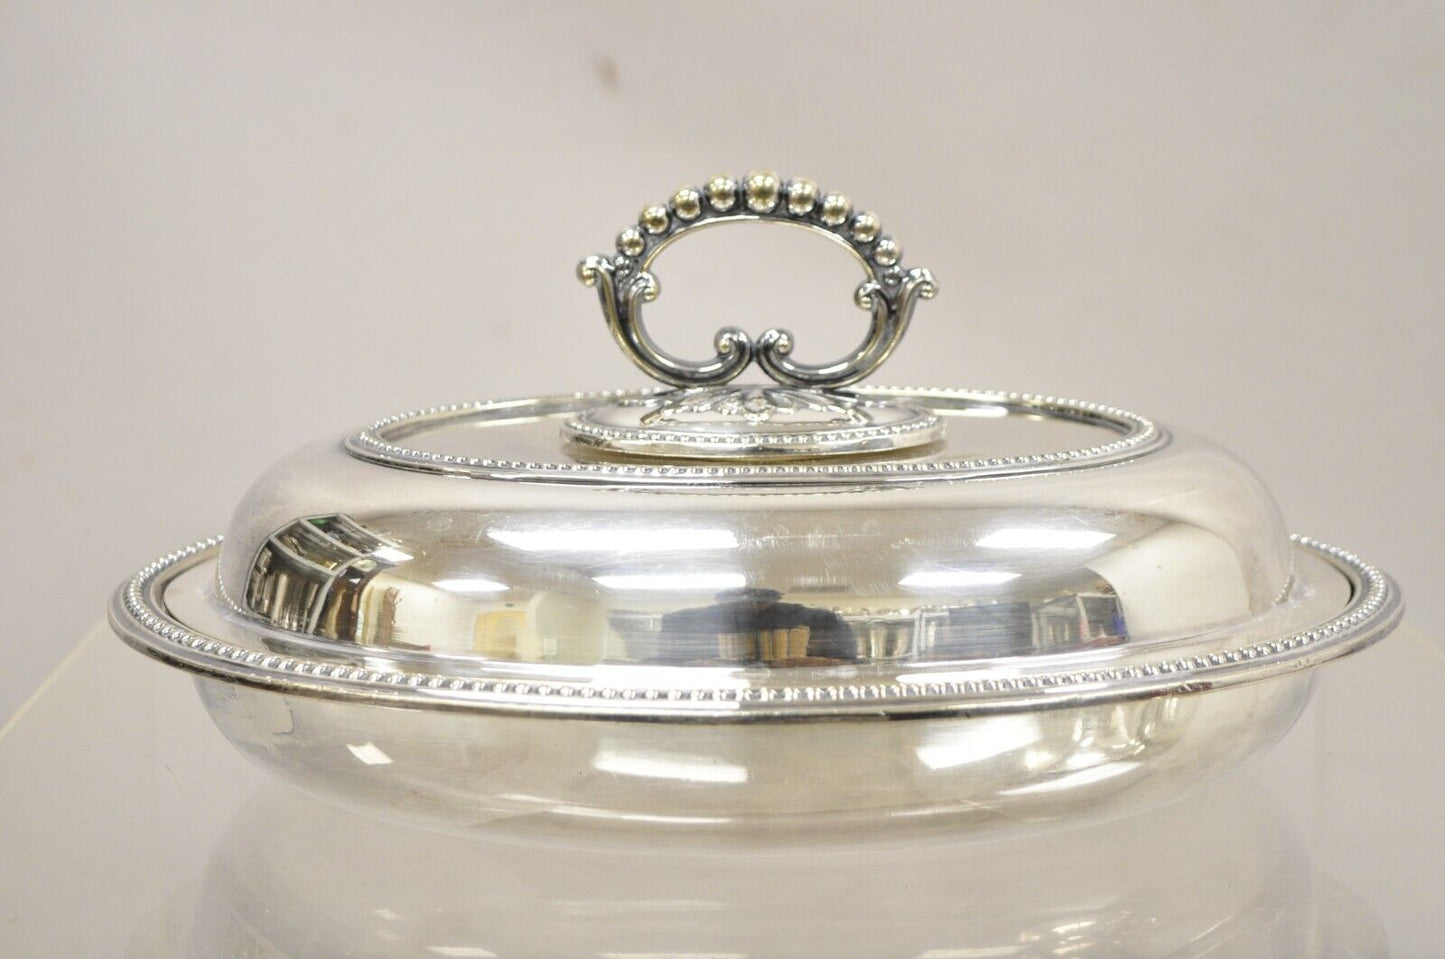 Mappin & Webb's Prince's Plate English Sheffield Silver Plated Covered Dish